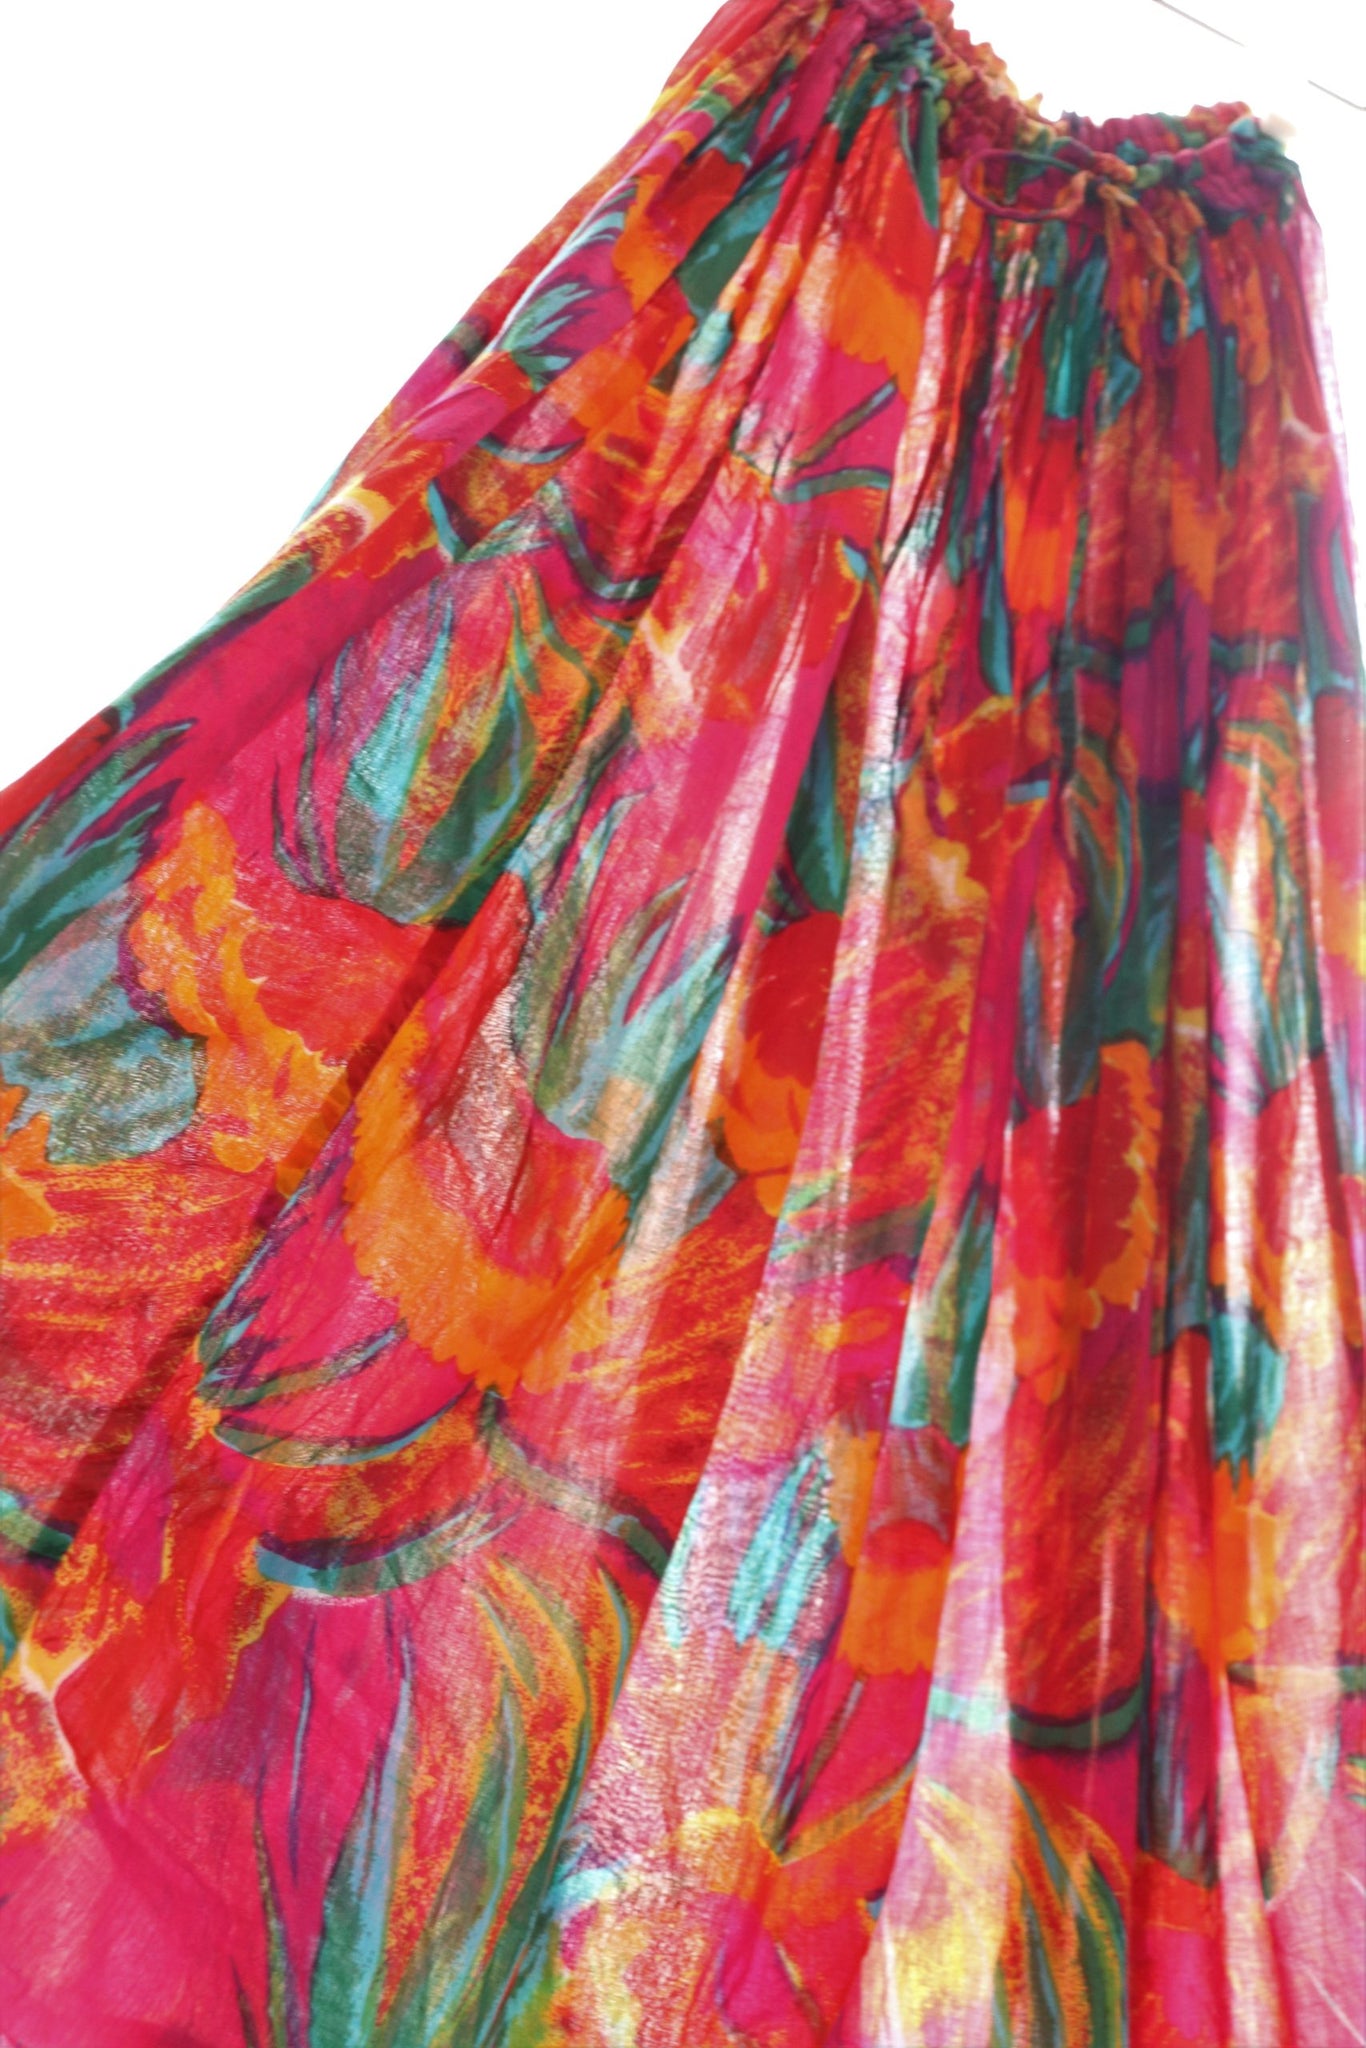 80s Floral Indian Cotton Skirt